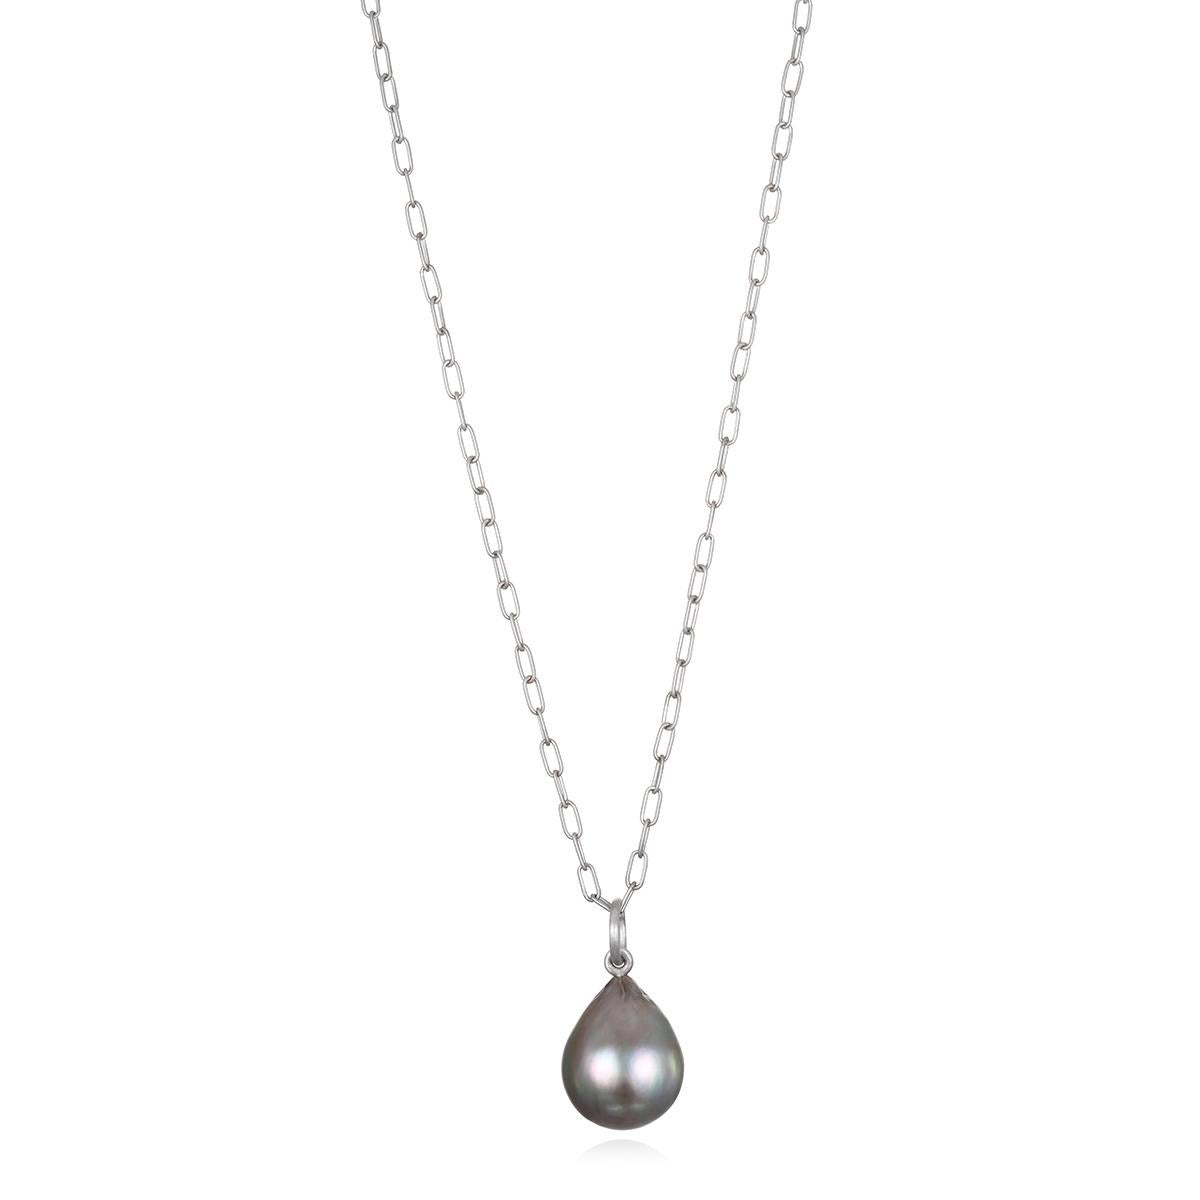 This beautiful Faye Kim Platinum Black Tahitian Pearl Drop Pendant, with its classic matte platinum jump ring, is both lustrous and classic. The pendant's modern design conveys understated elegance and a truly stylish, everyday look and is perfect